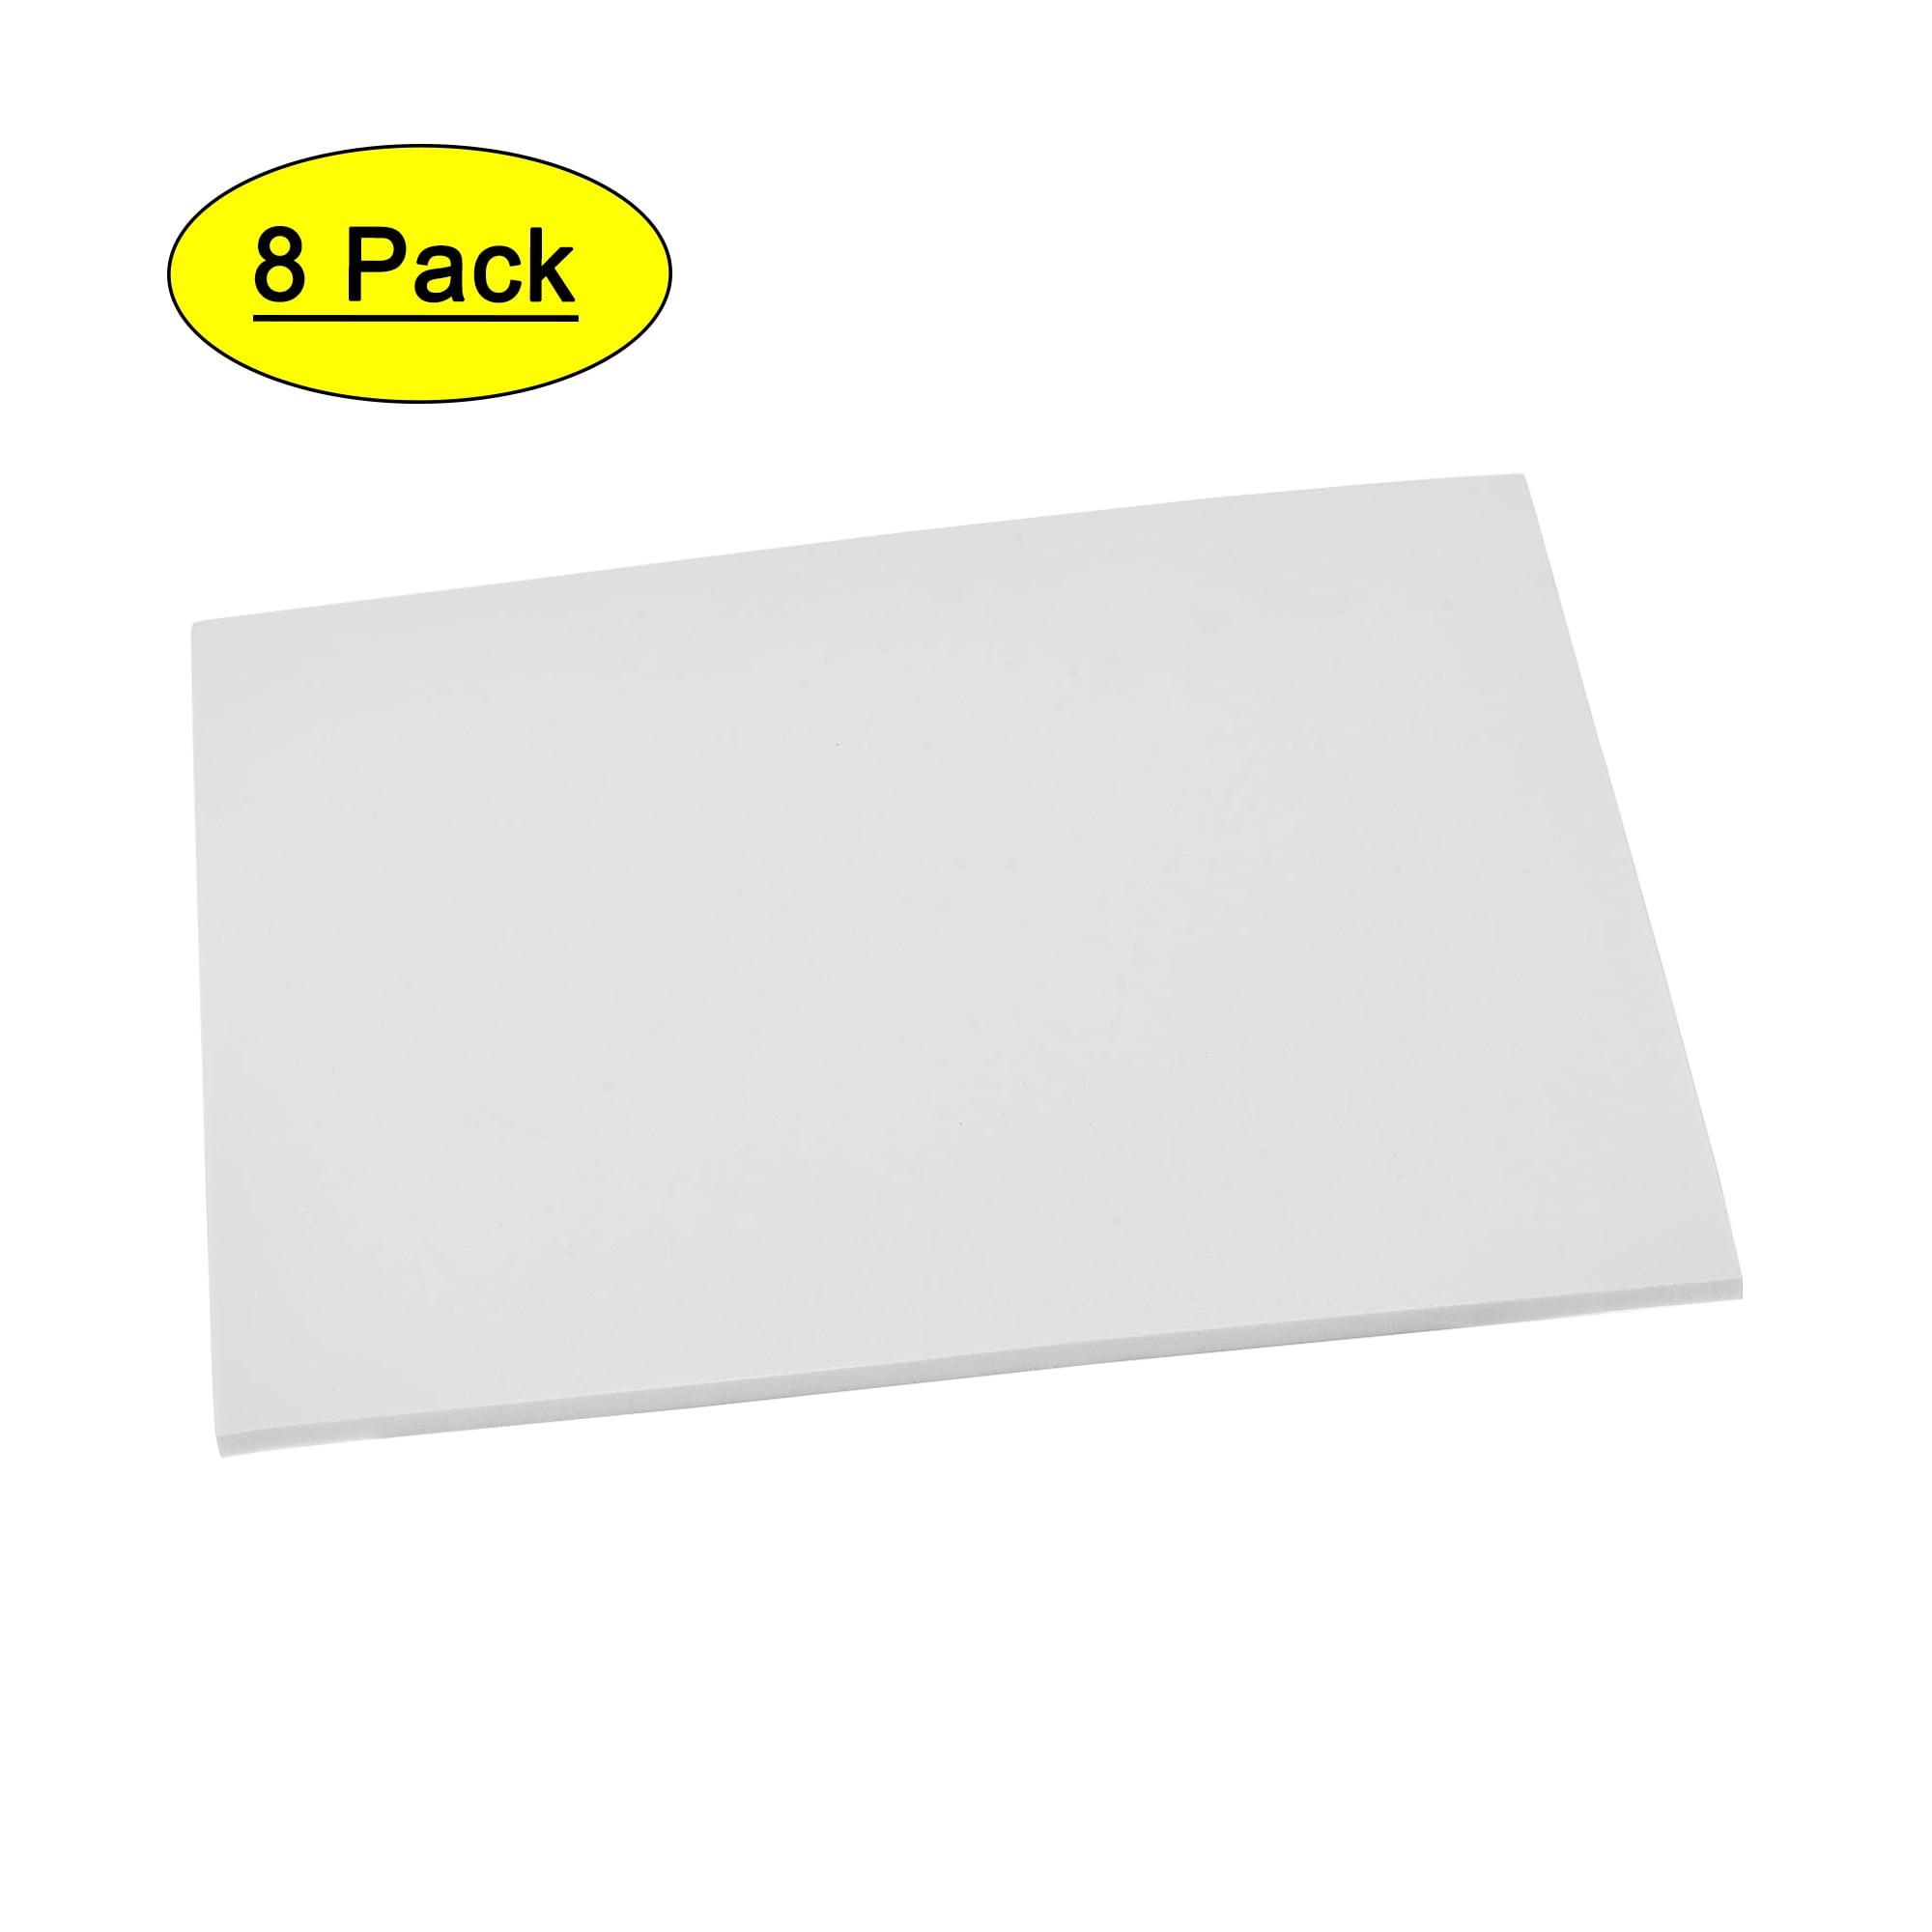 Polyethylene Foam Sheet - Polyurethane Foam Pads For Packing And Crafts,  16Inch X 12Inch X 1Inch Thickness - AliExpress